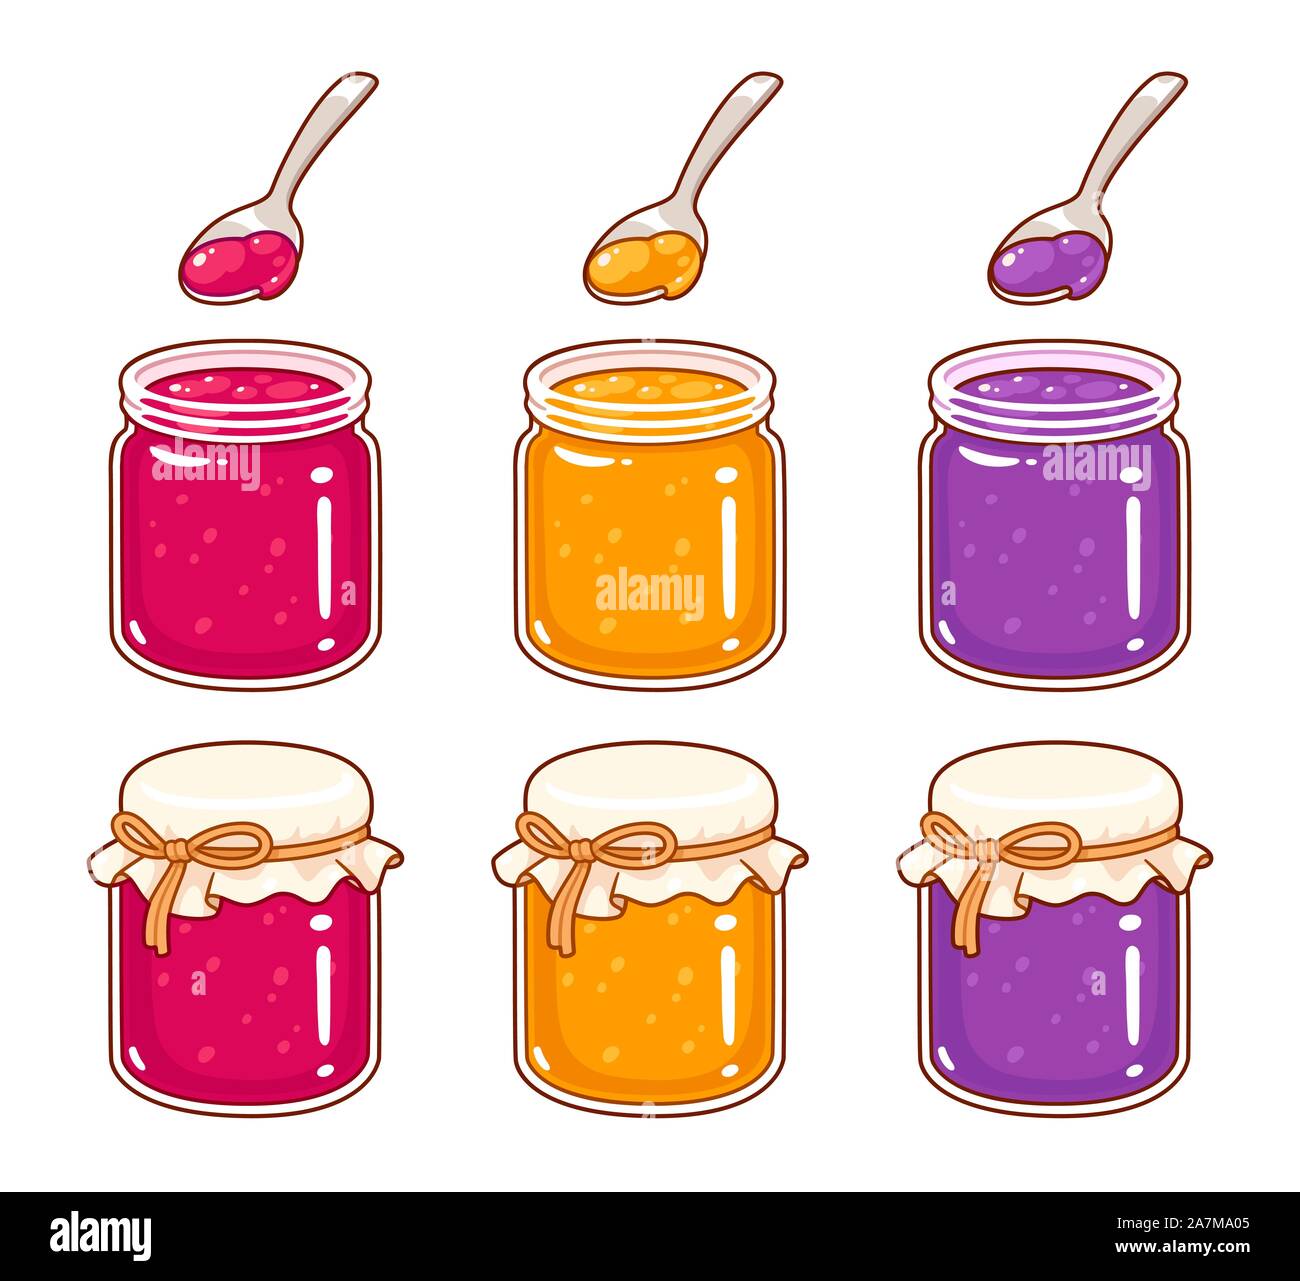 https://c8.alamy.com/comp/2A7MA05/hand-drawn-cartoon-style-jam-jars-set-raspberry-apricot-and-grape-jelly-traditional-homemade-fruit-preserves-isolated-vector-clip-art-illustration-2A7MA05.jpg